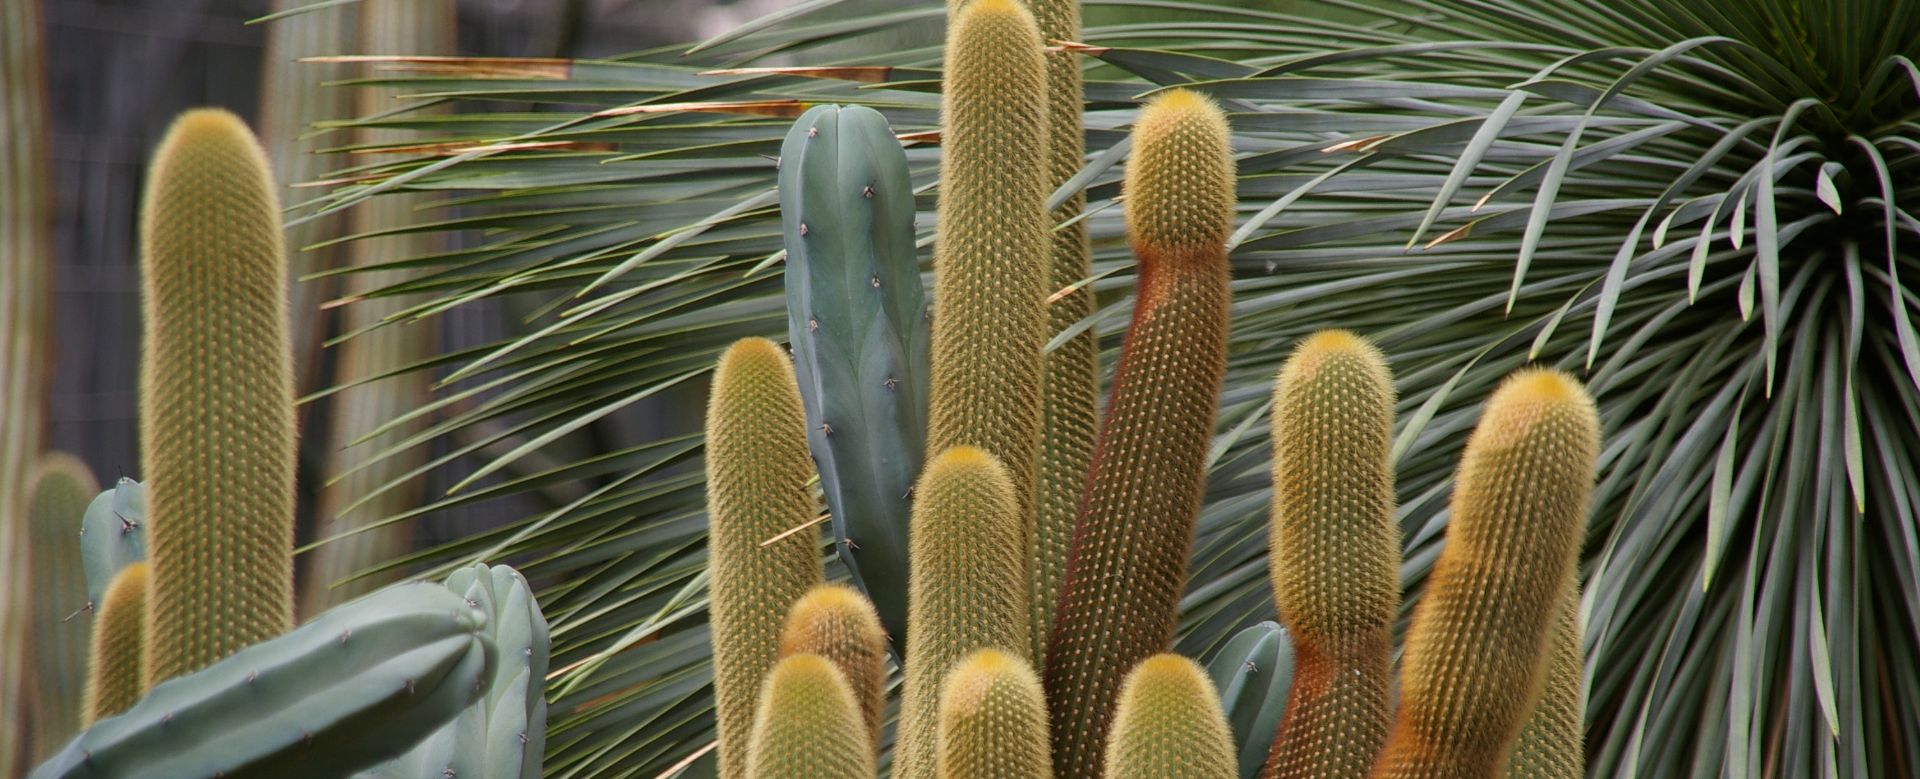 Exploring the Vibrant World of Plants in Tucson